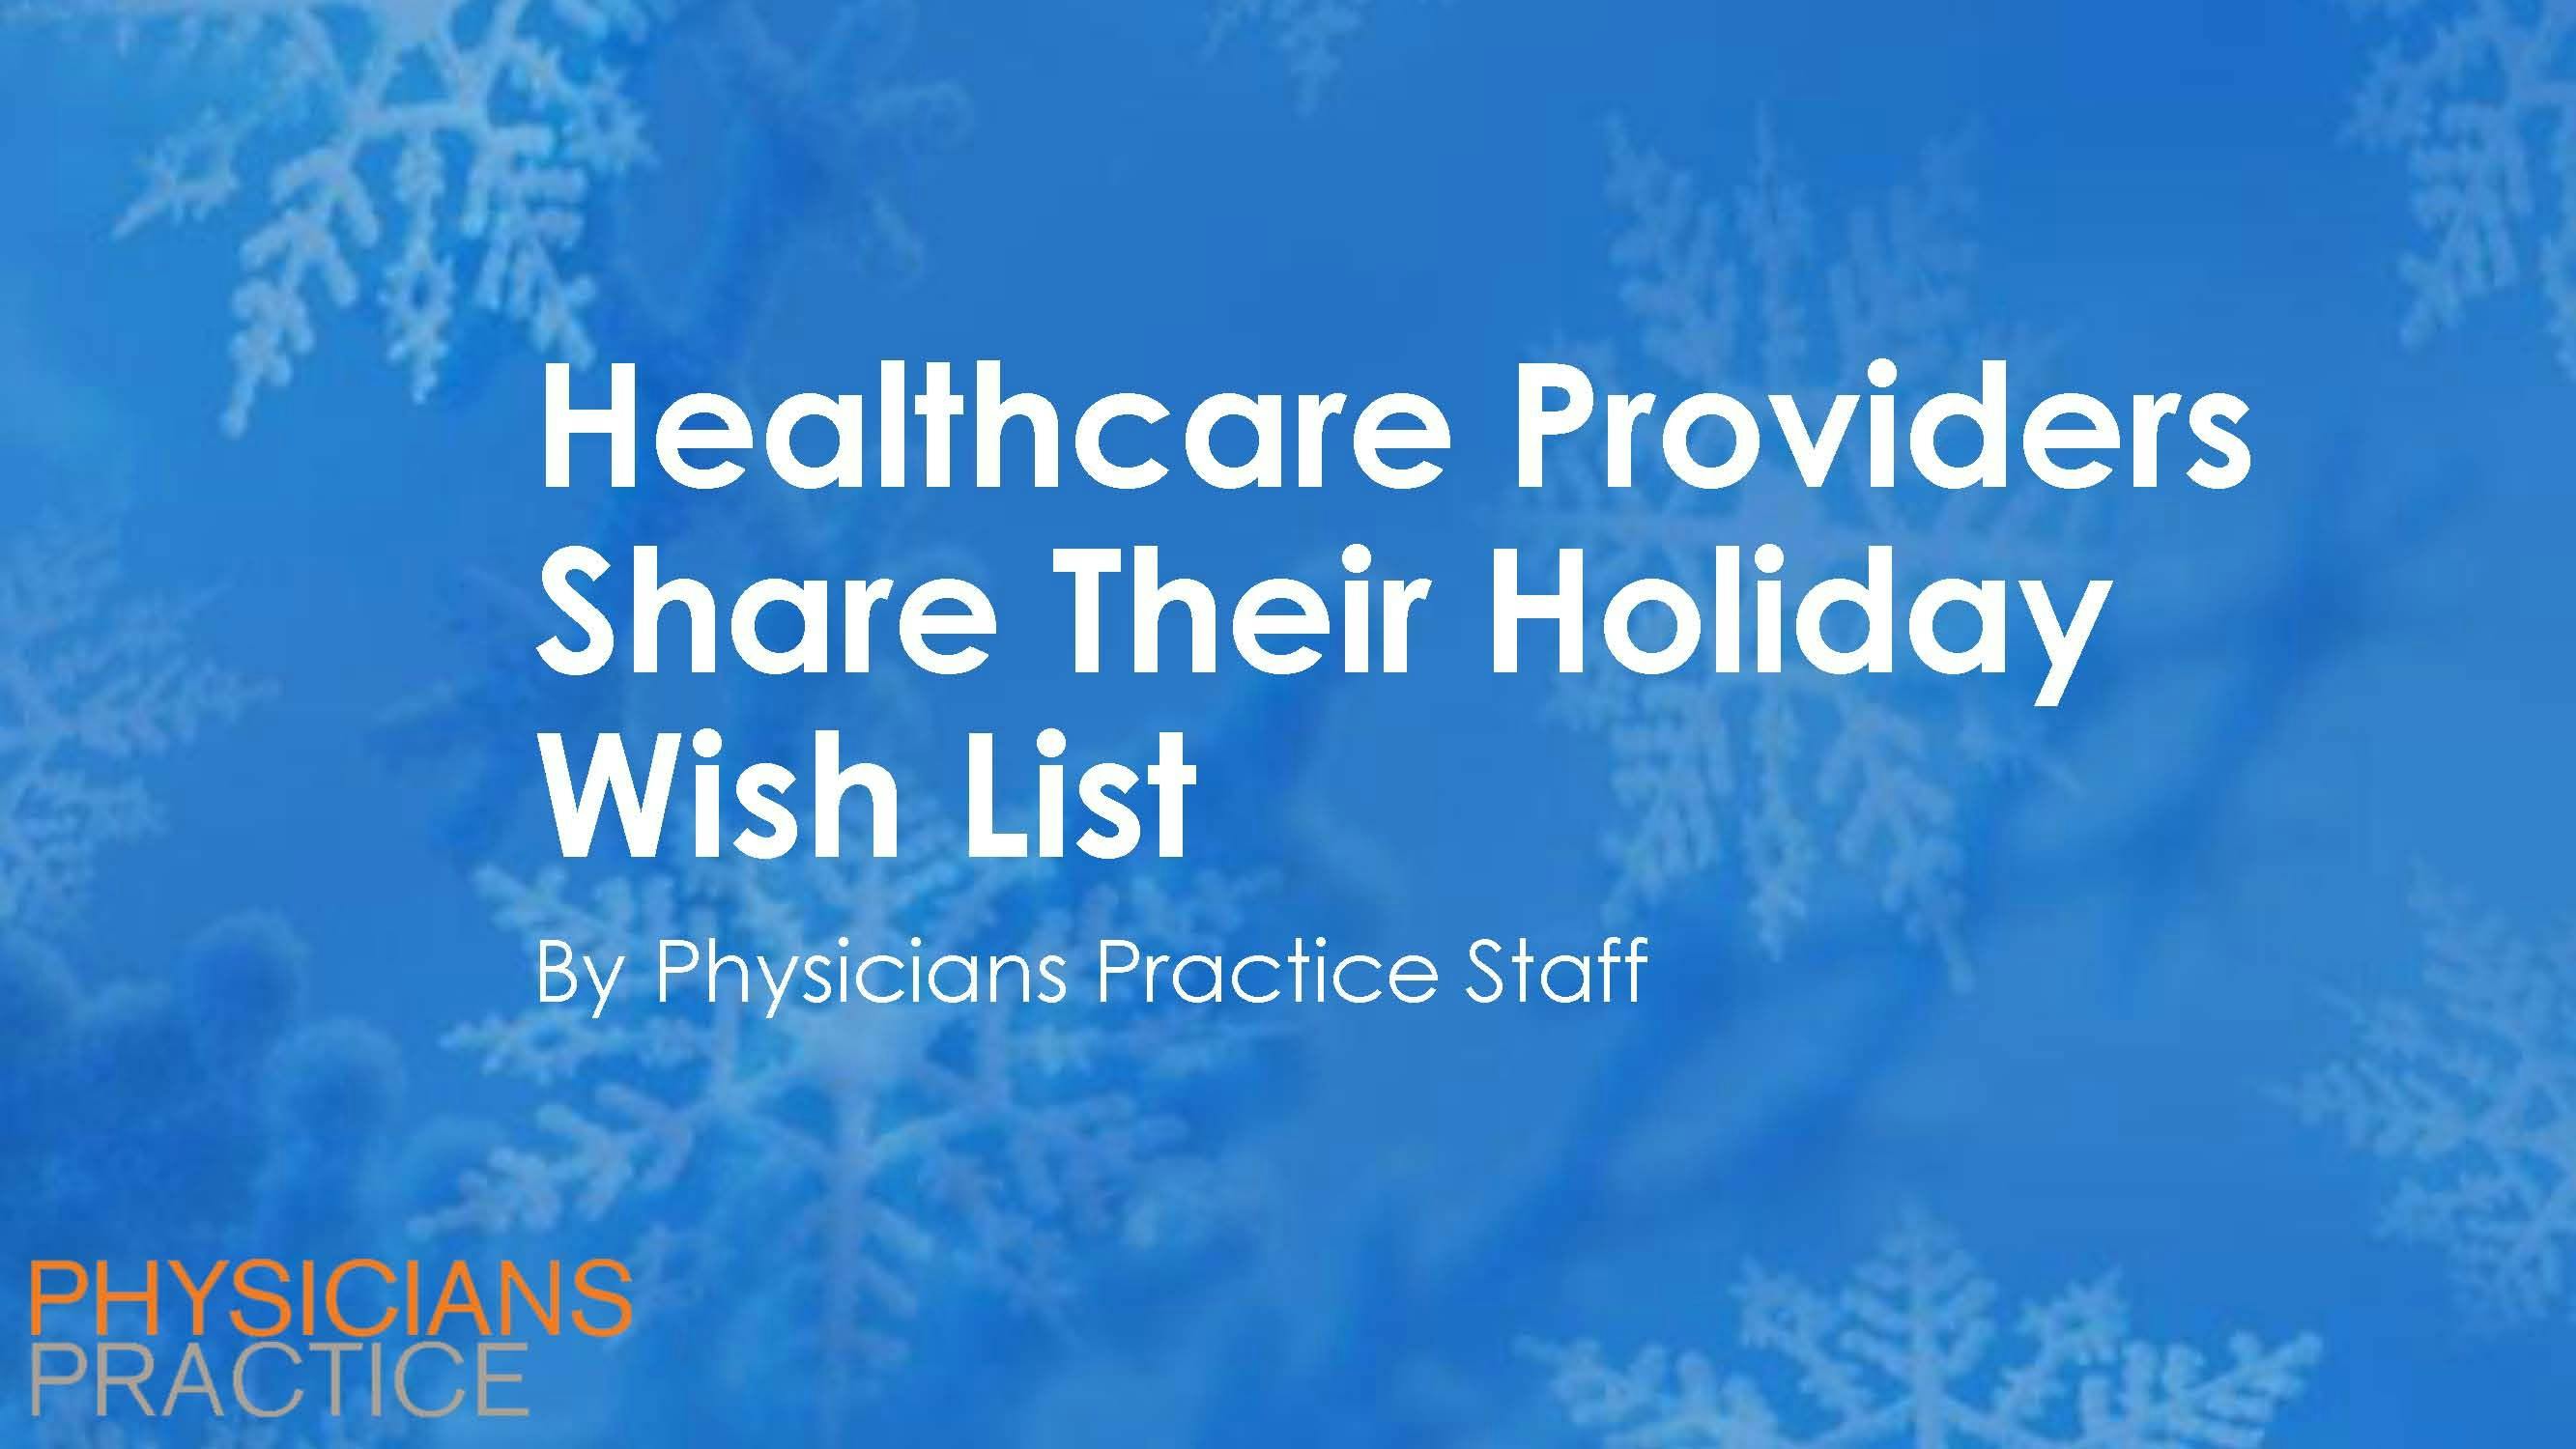 Healthcare Providers Share Their Holiday Wish List